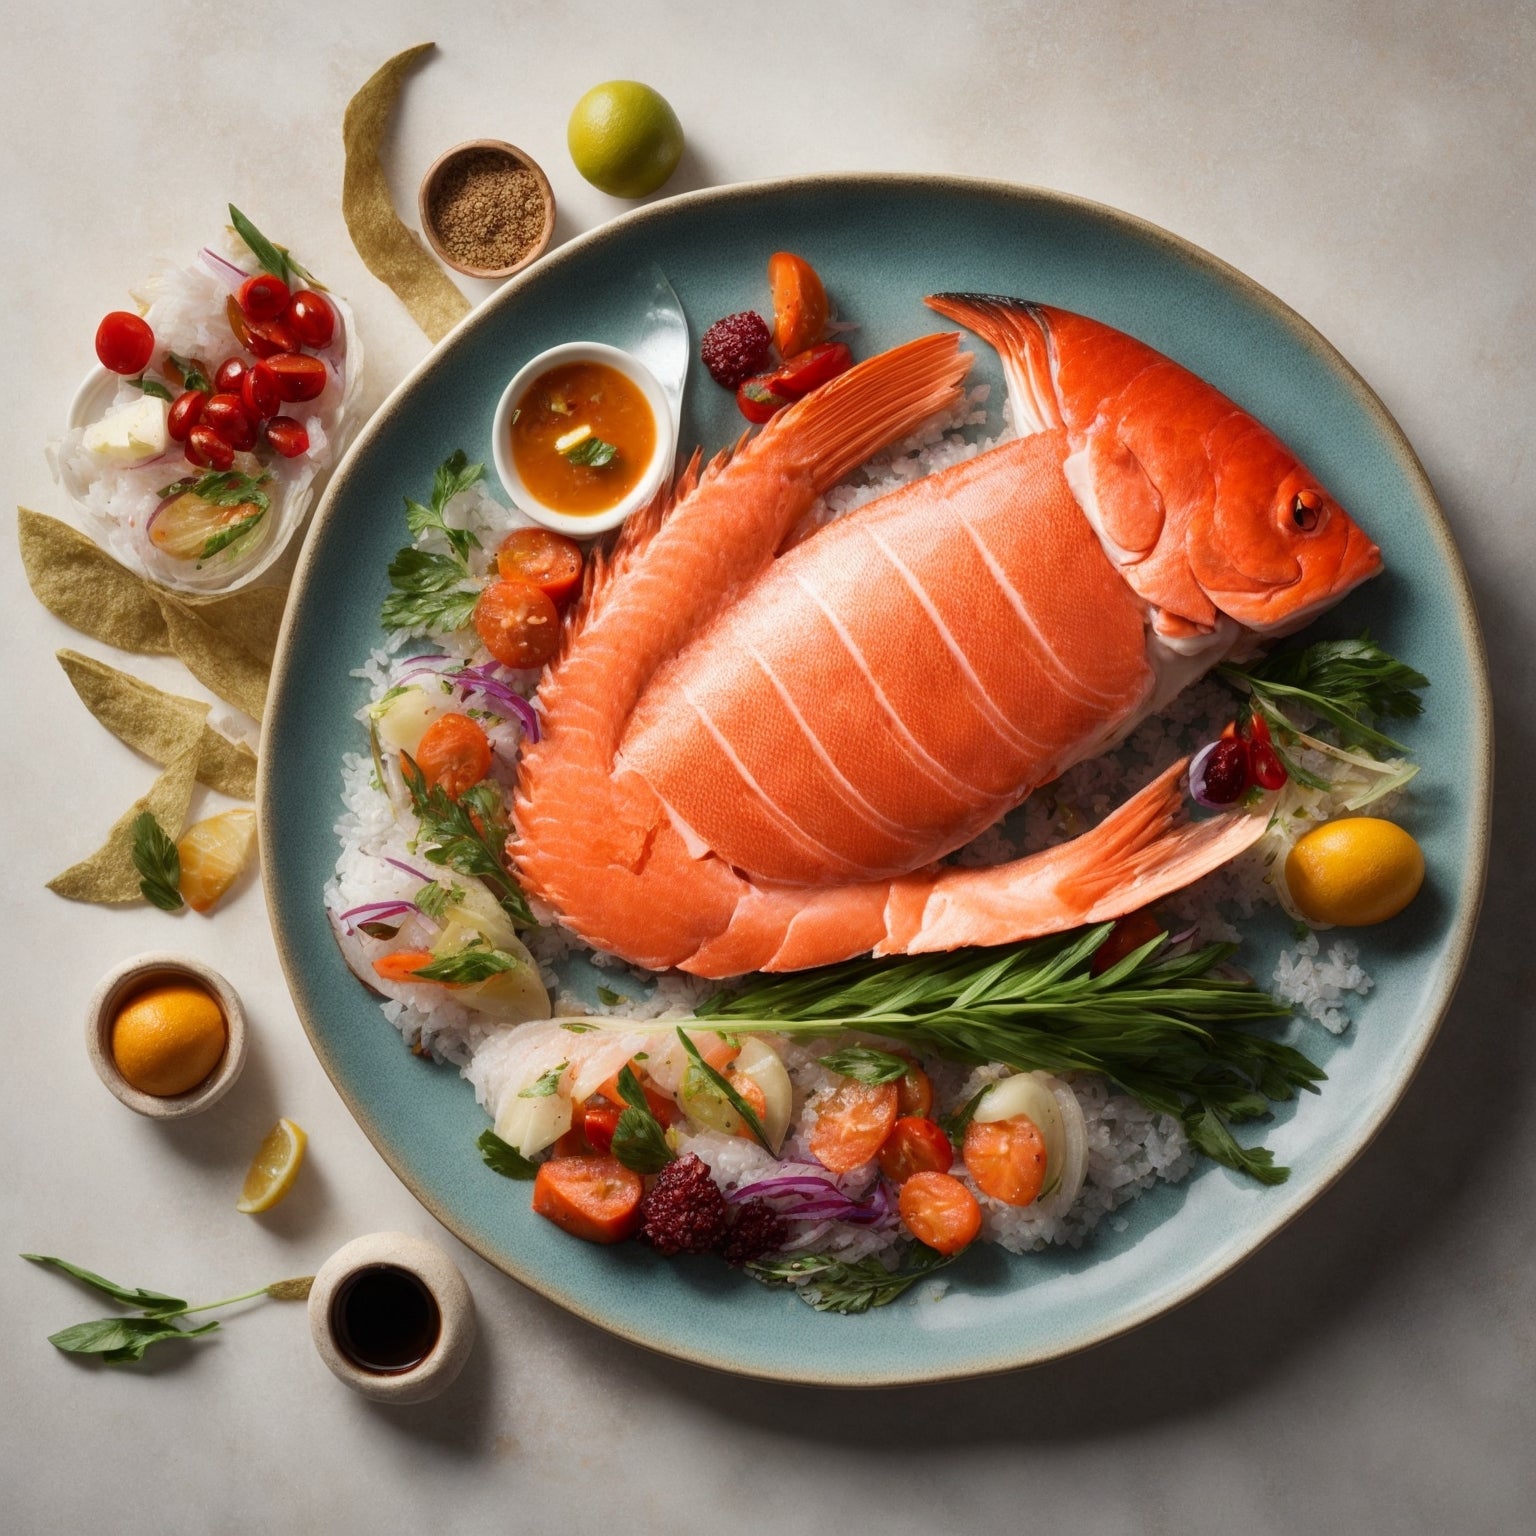 Conscious Choices: Global Seafoods' Sustainable Seafood Selection